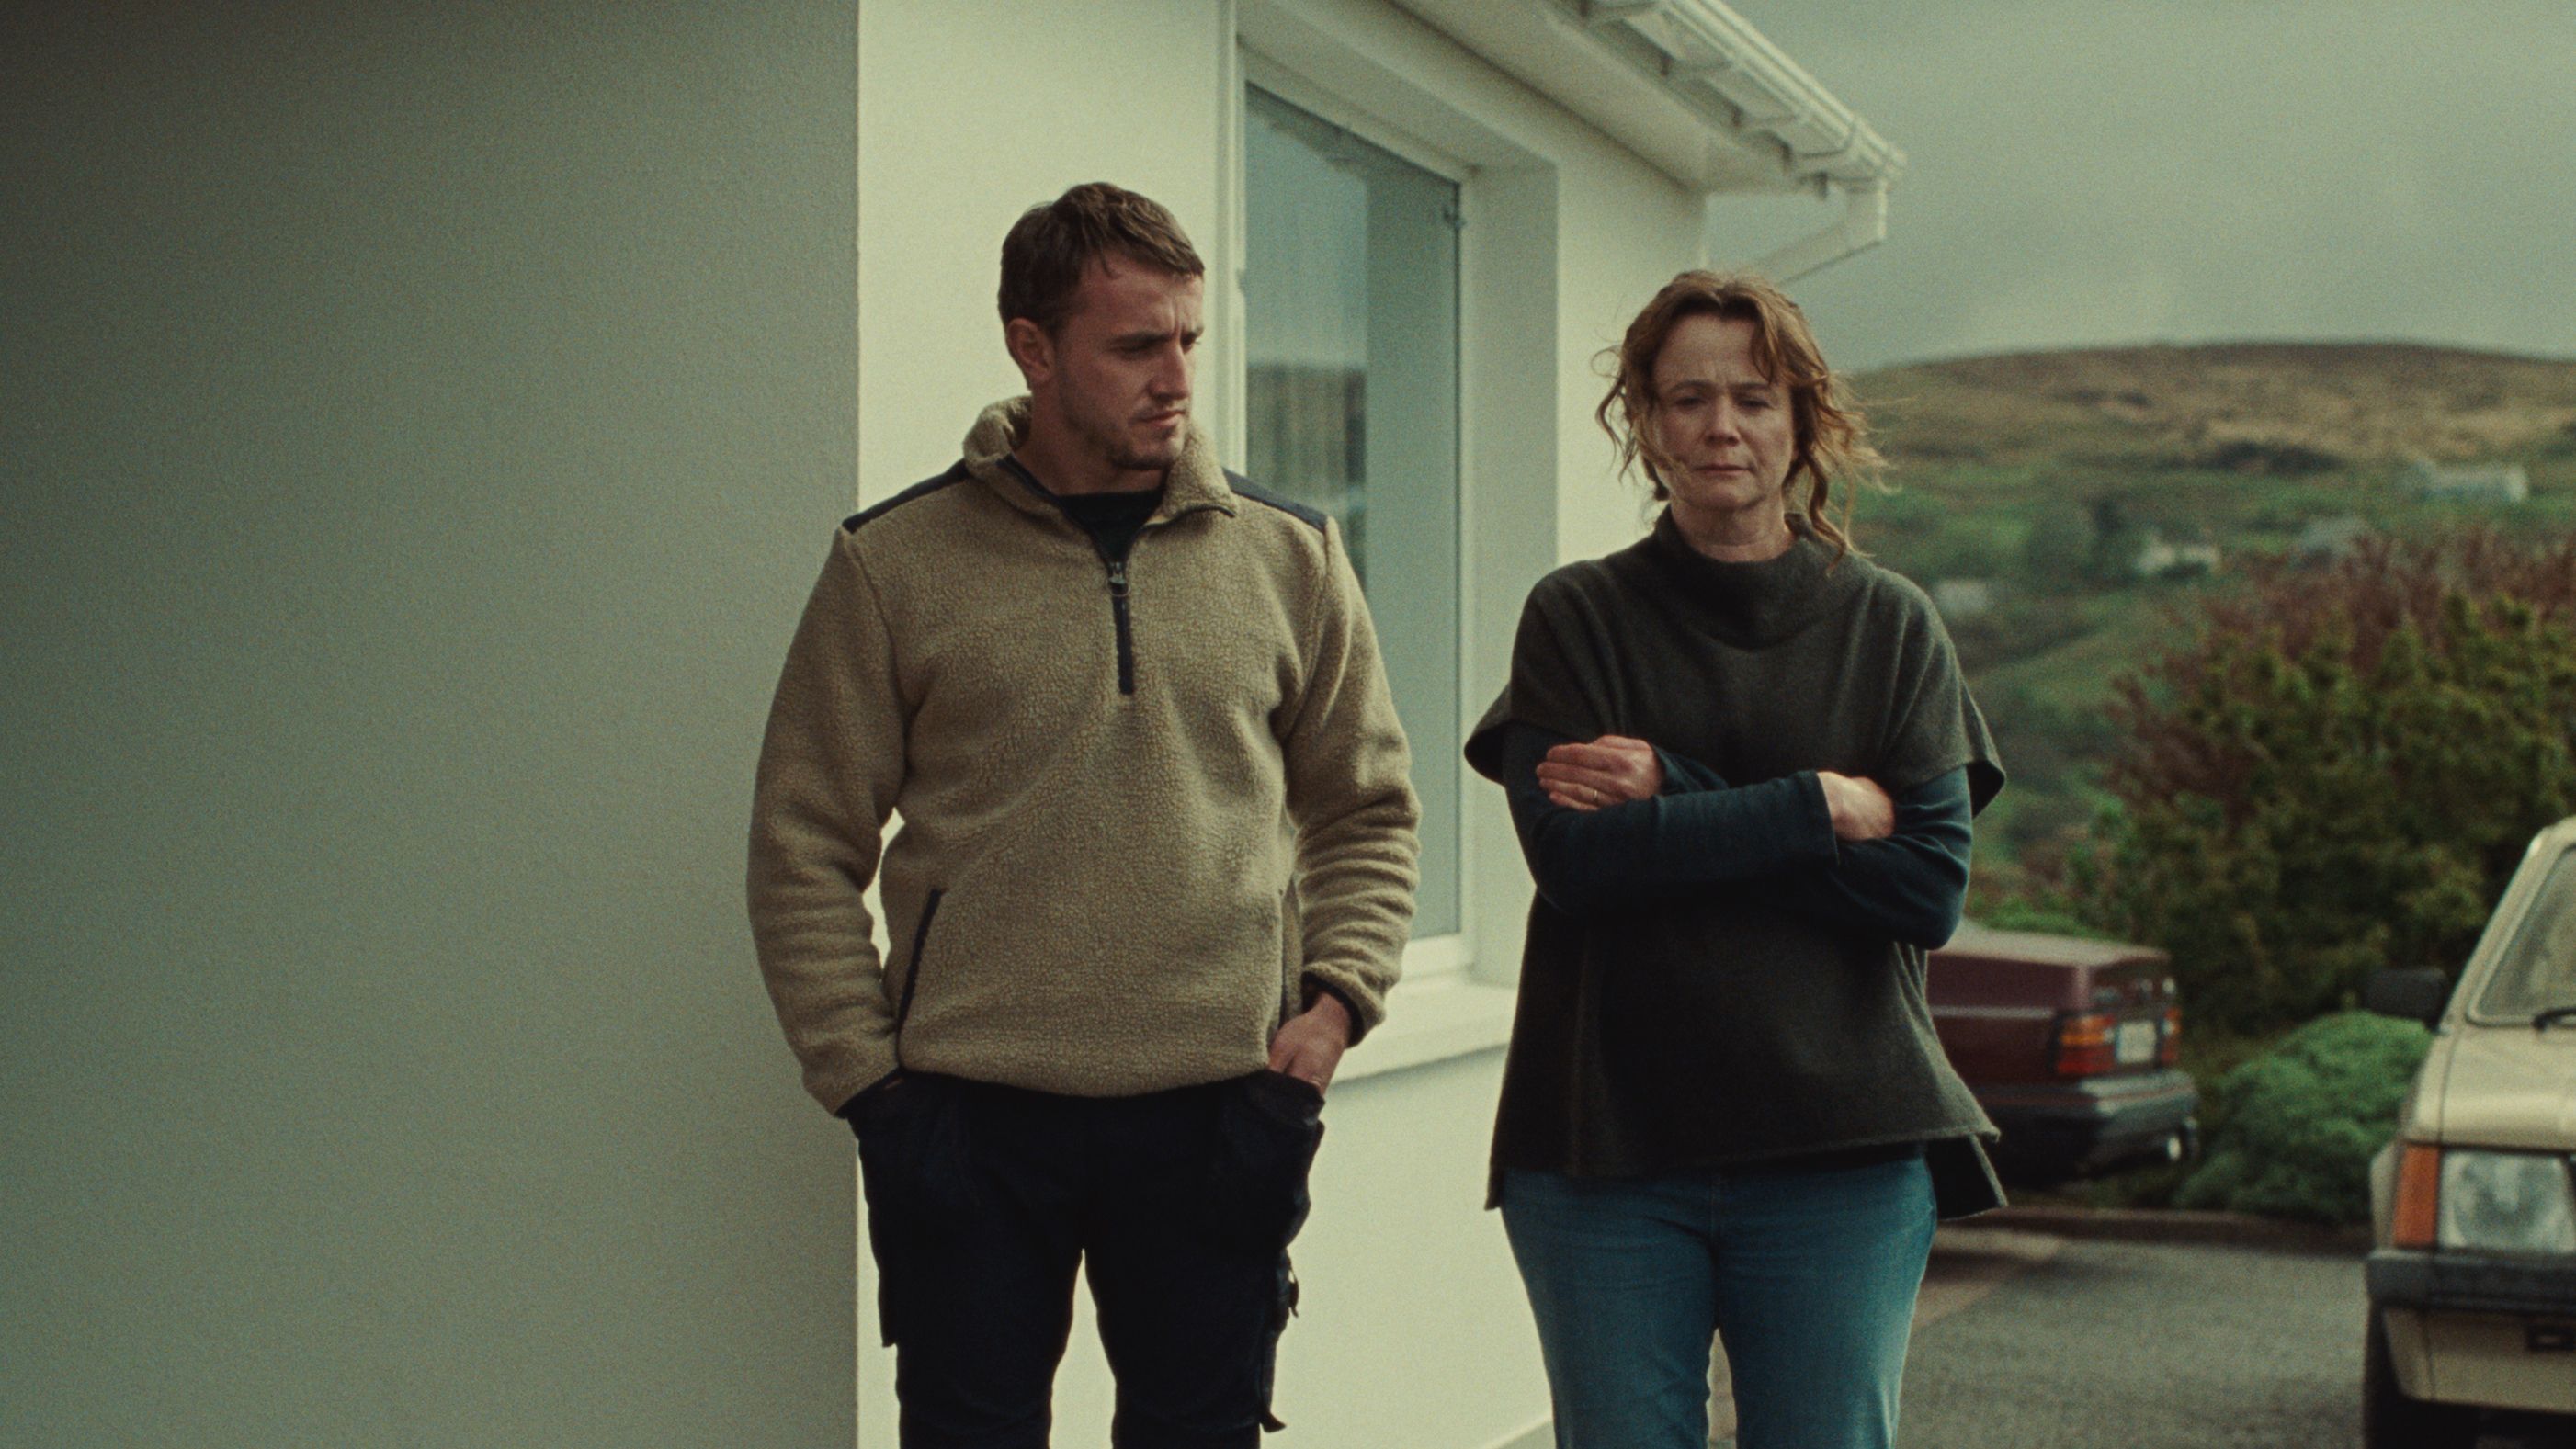 Paul Mescal and Emily Watson in "God’s Creatures" (Courtesy of A24)